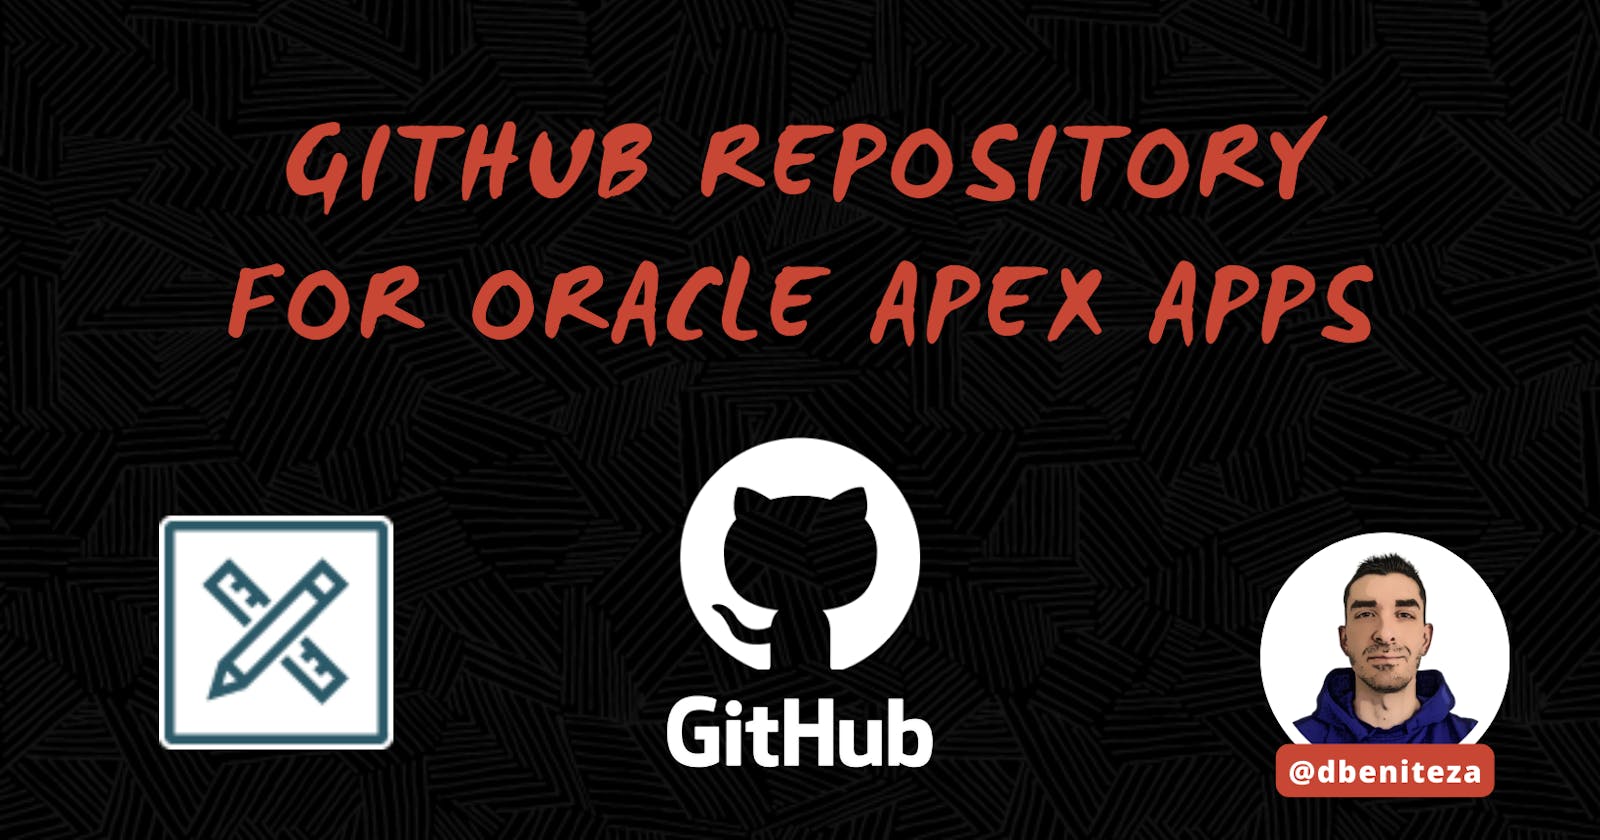 GitHub repotory for Oracle APEX applications